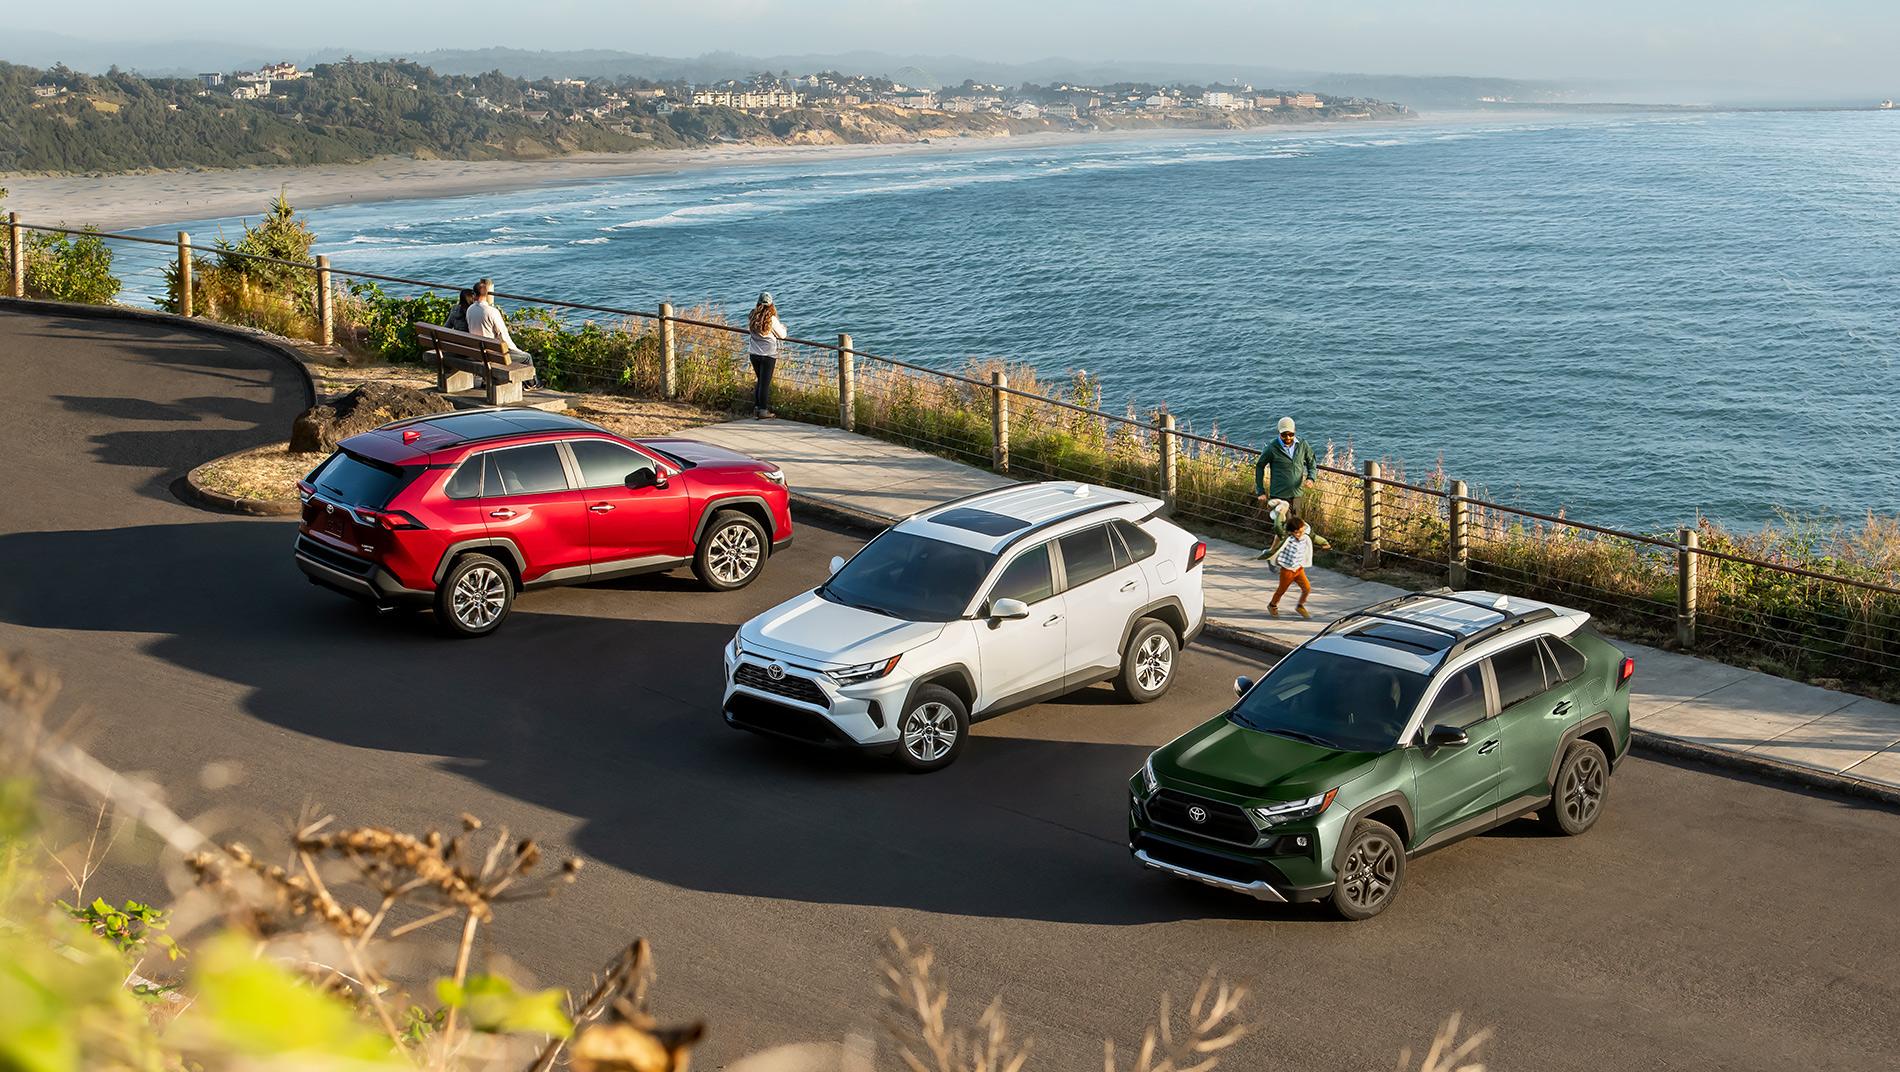 Toyota SUV Vehicle lineup in a parking log overlooking a beach and the ocean